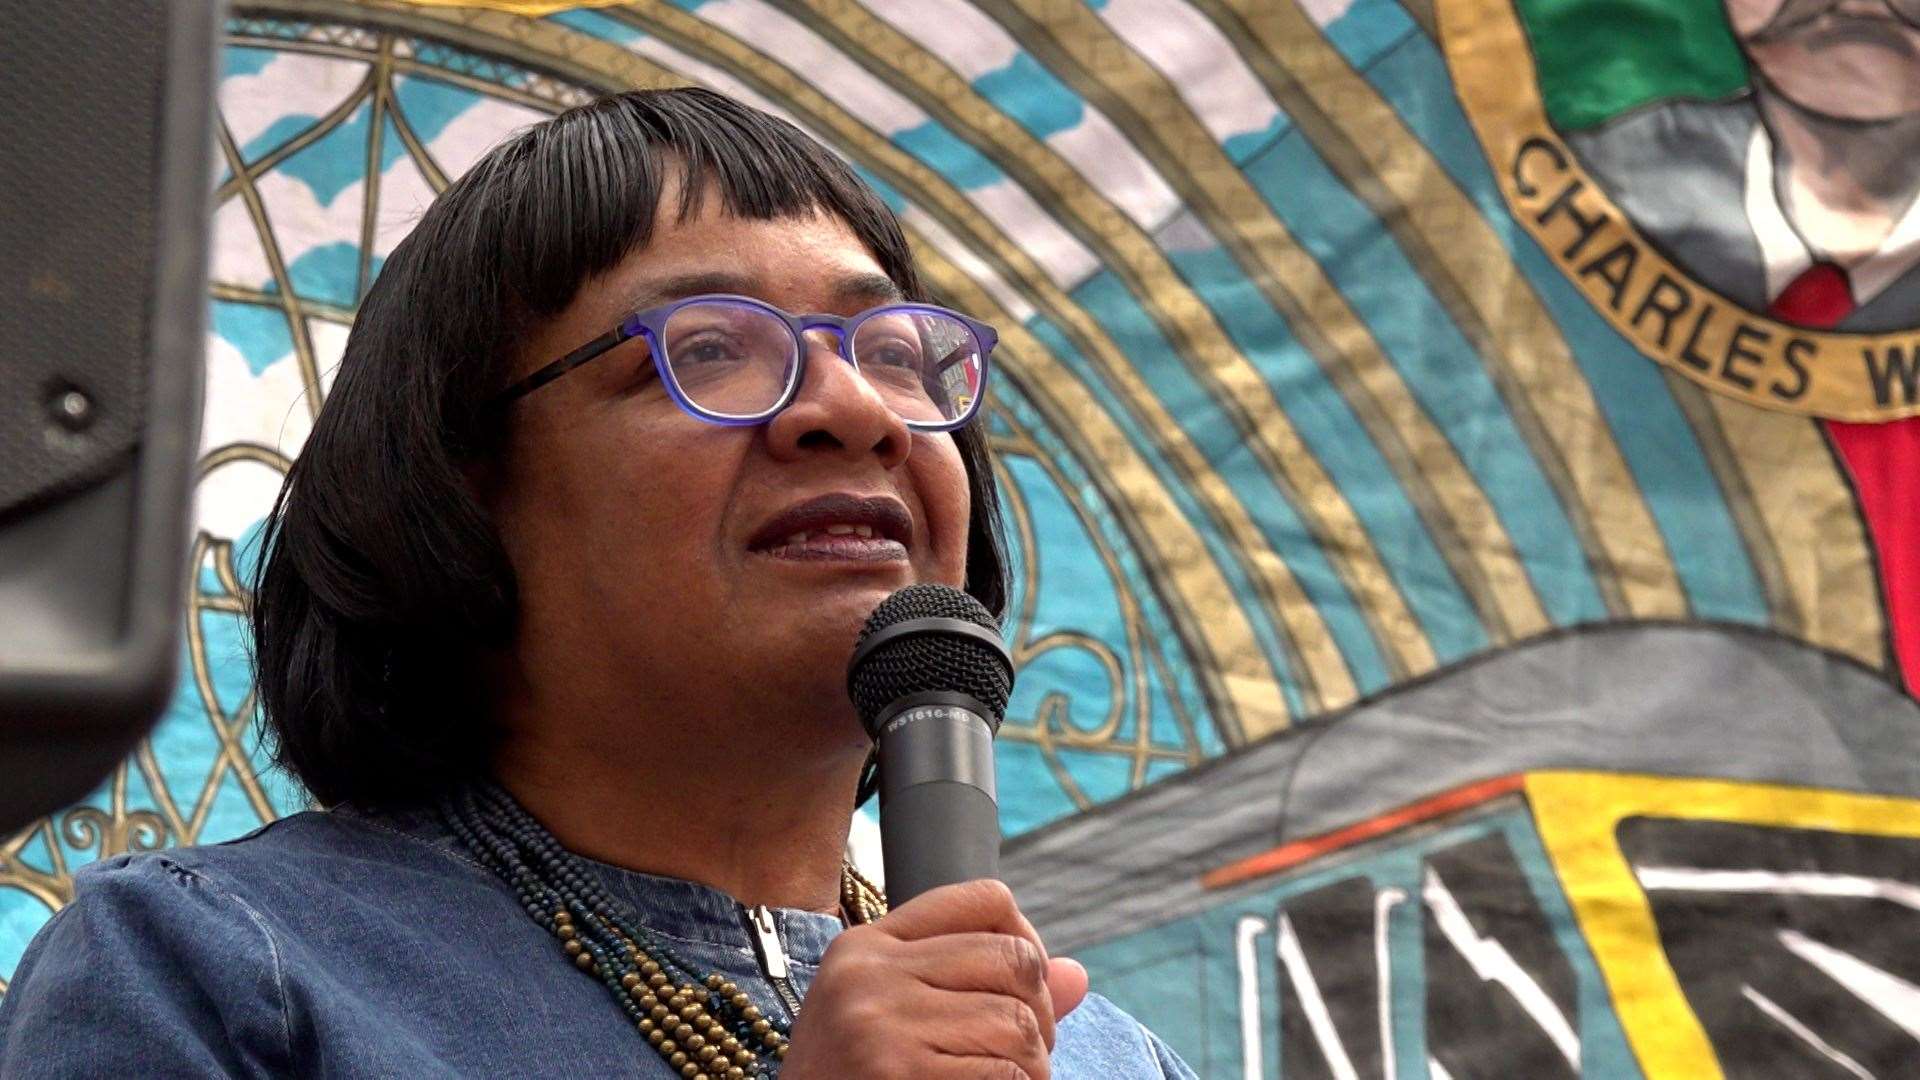 Labour MP Diane Abbot speaks at a rally outside King’s Cross station, London (Sarah Collier/PA)